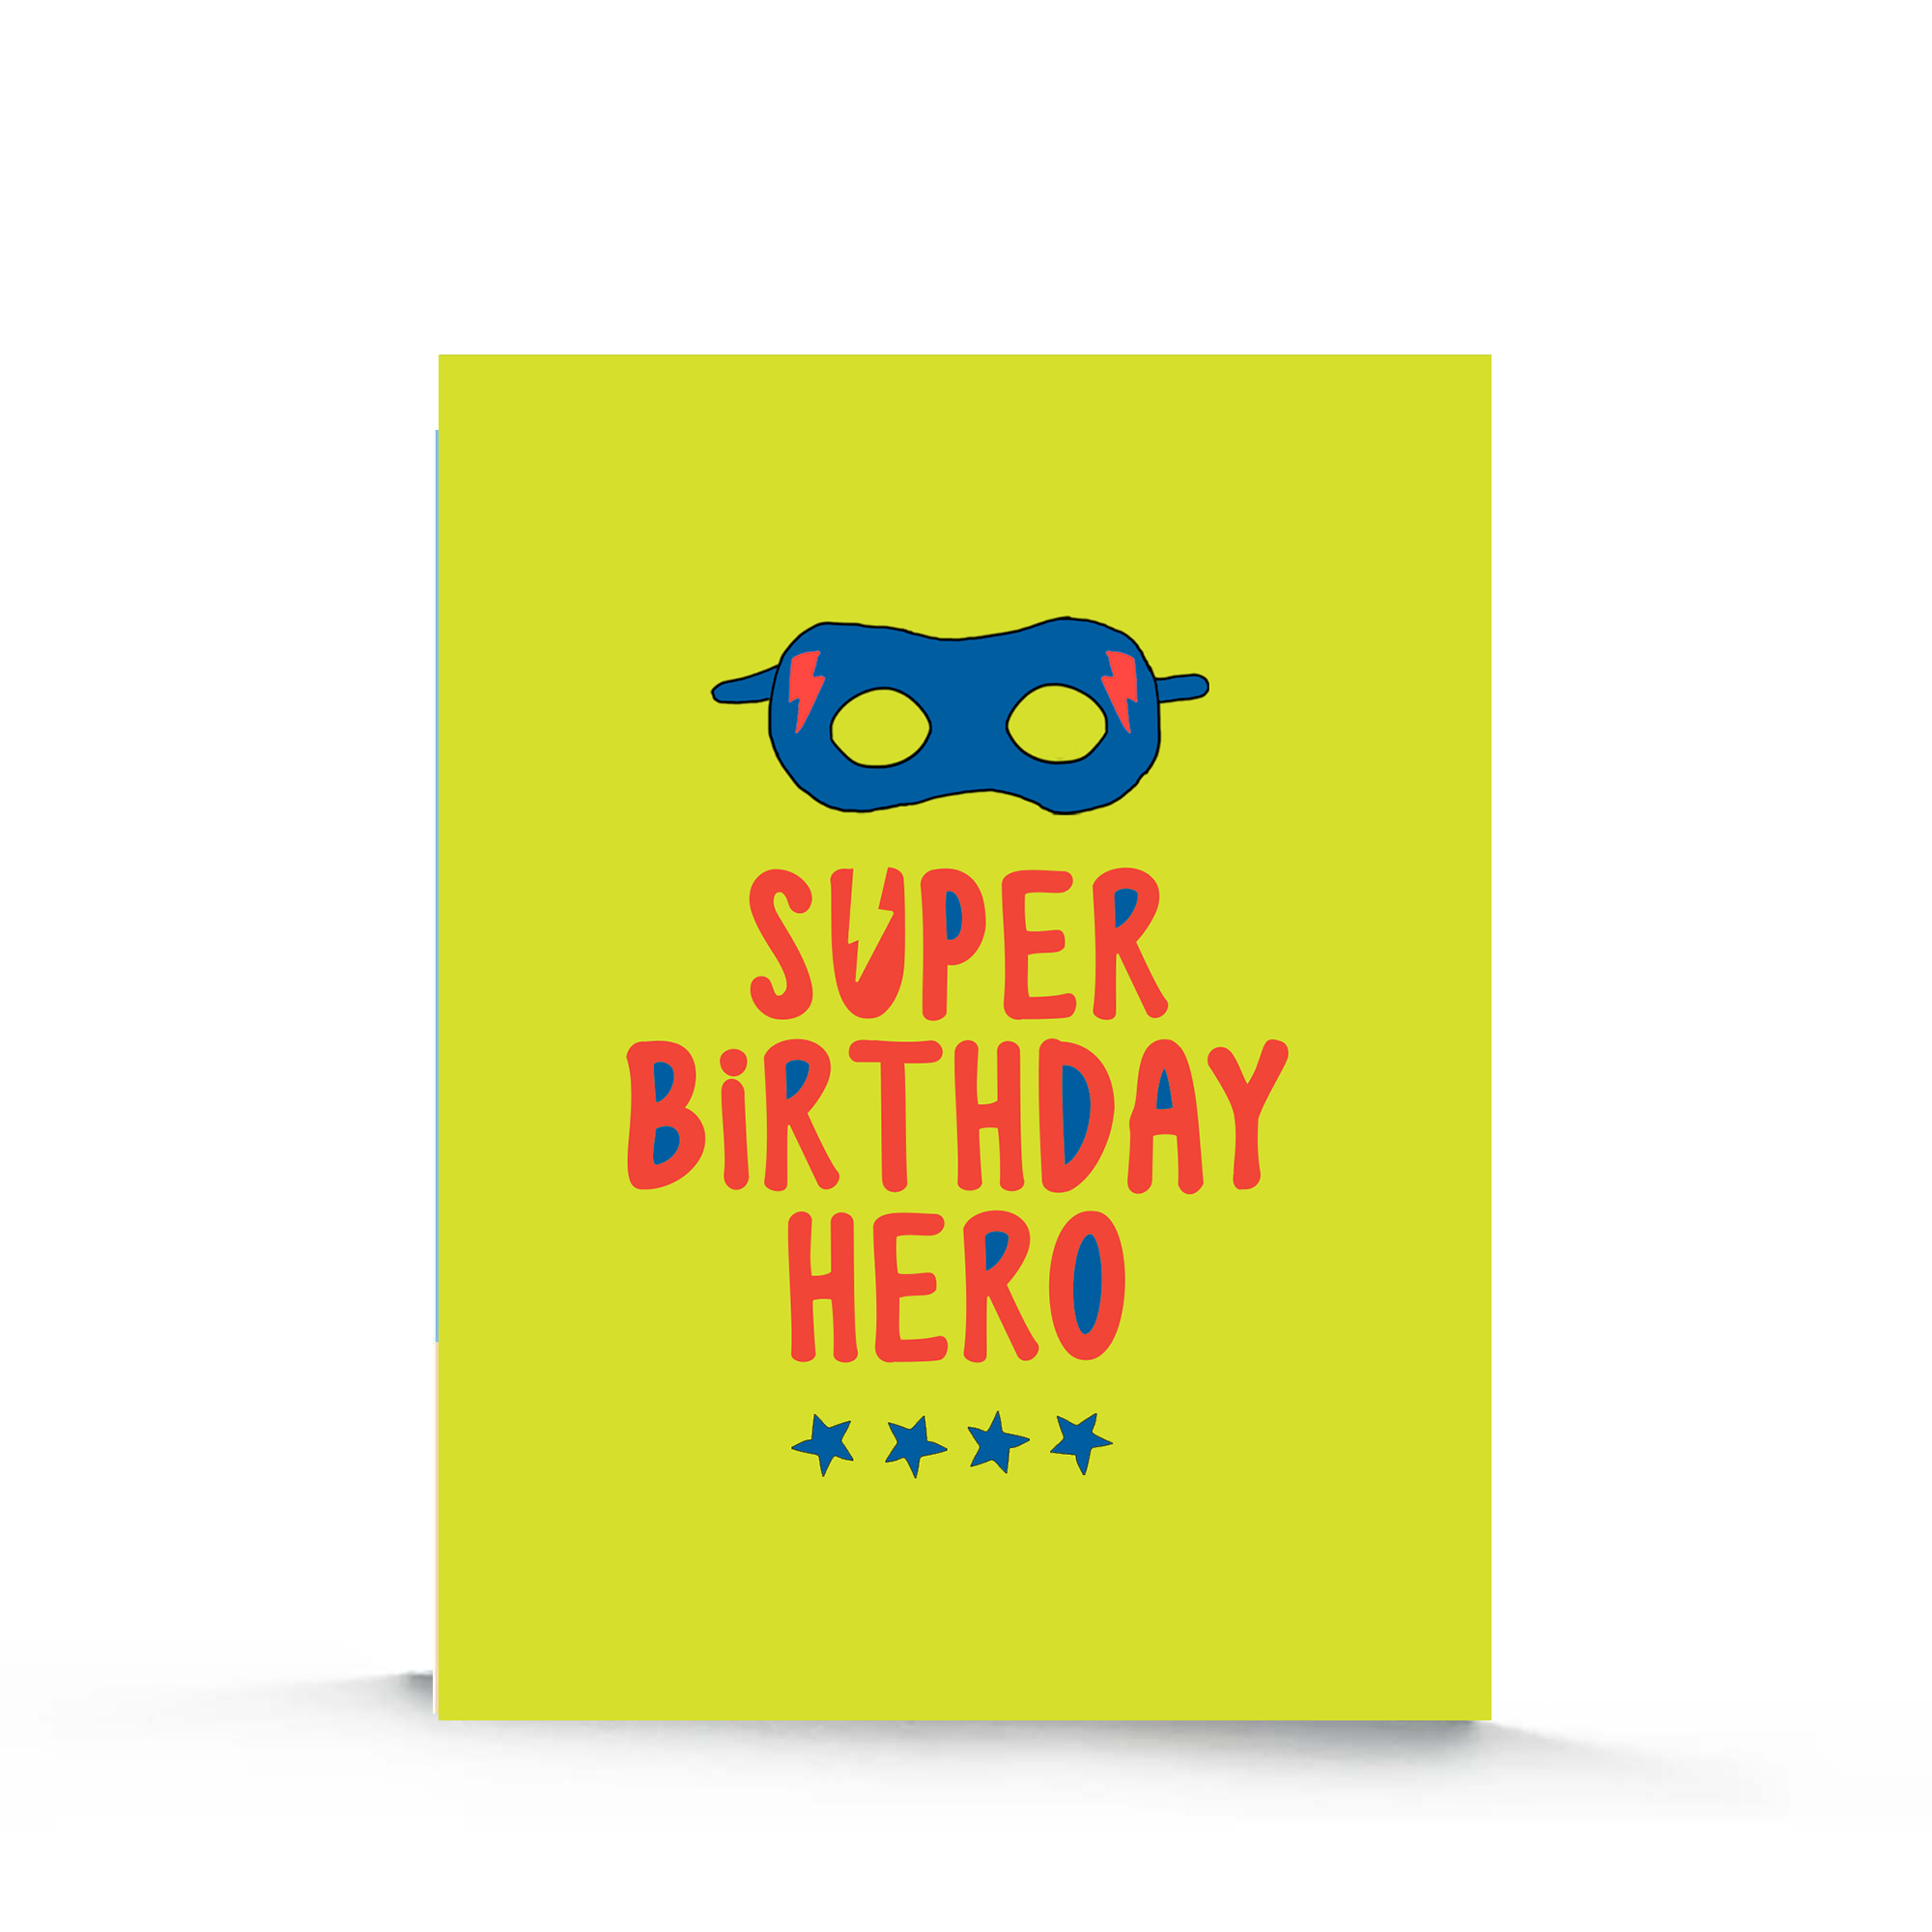 This Superhero Birthday Card | Superhero Mask Birthday Card is made with love by Stacey M Design! Shop more unique gift ideas today with Spots Initiatives, the best way to support creators.